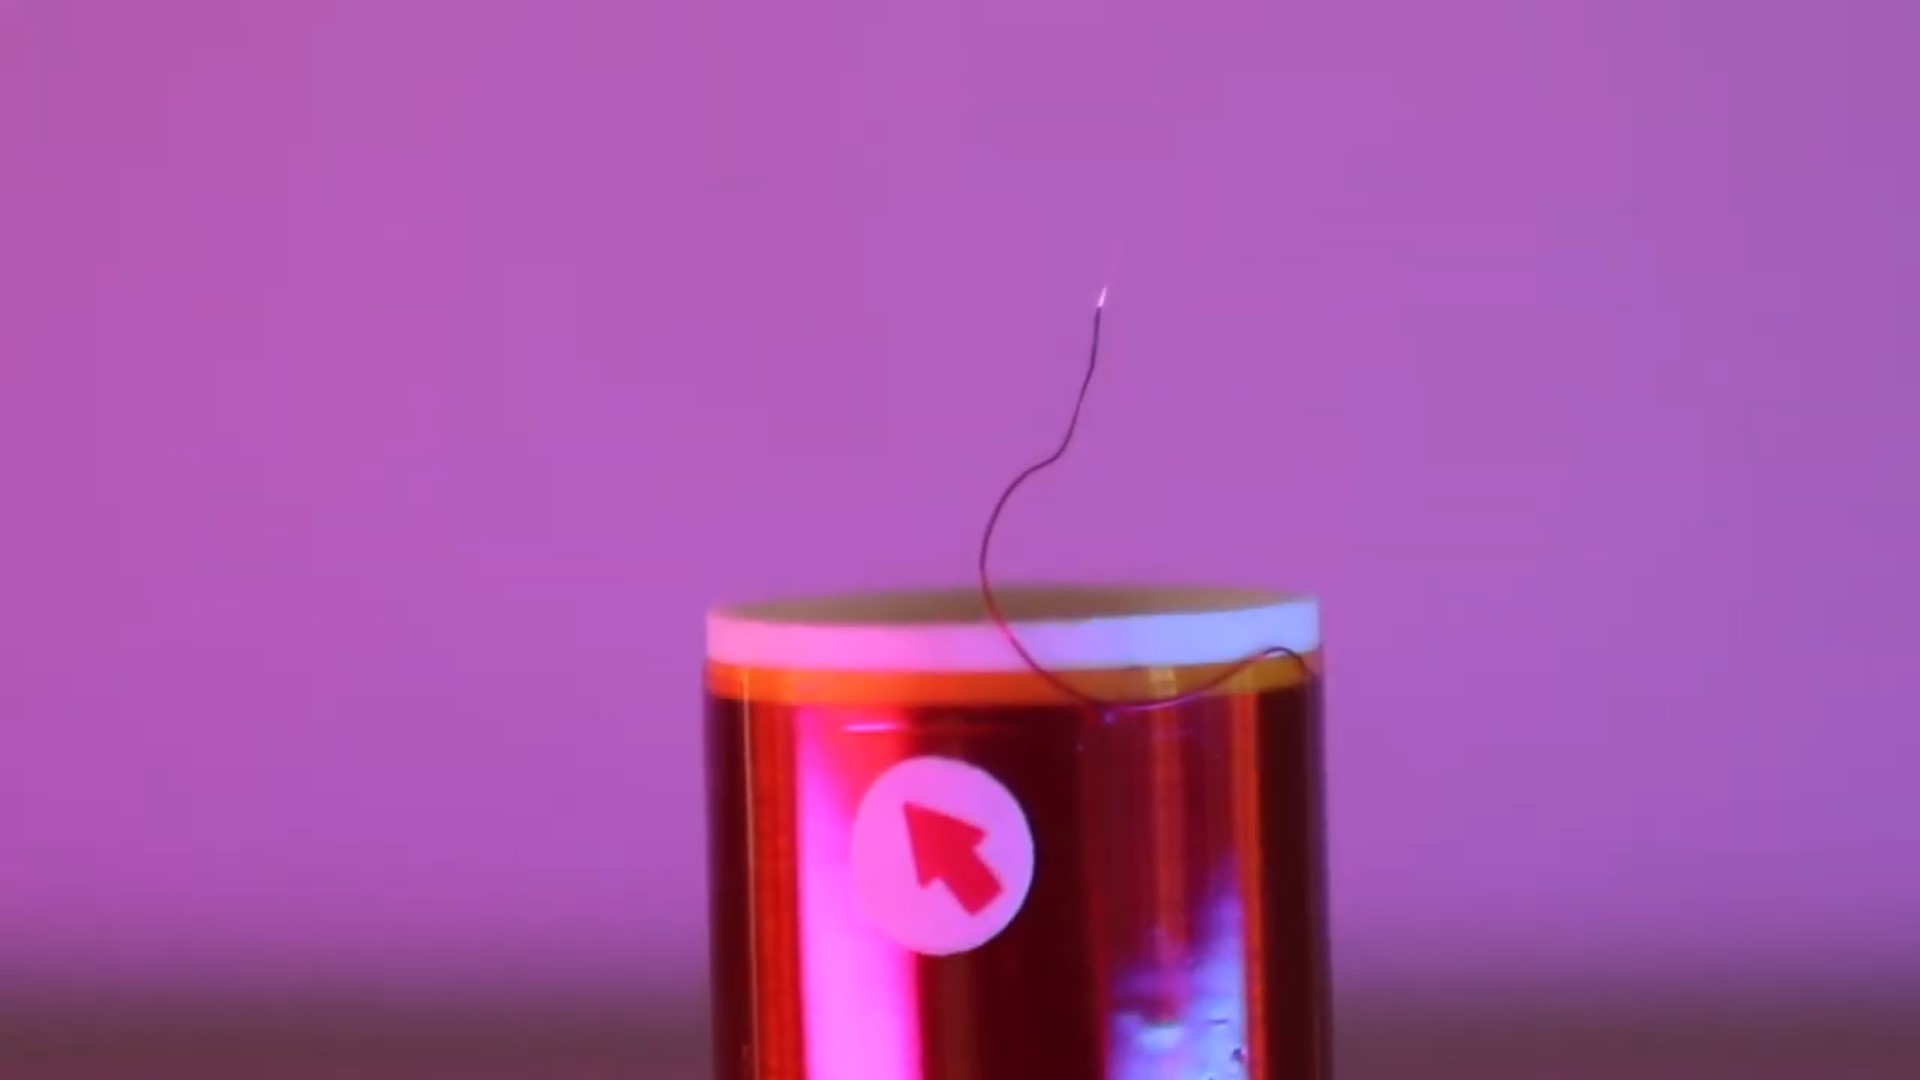 High Voltage Discharge From Small DIY Tesla Coil